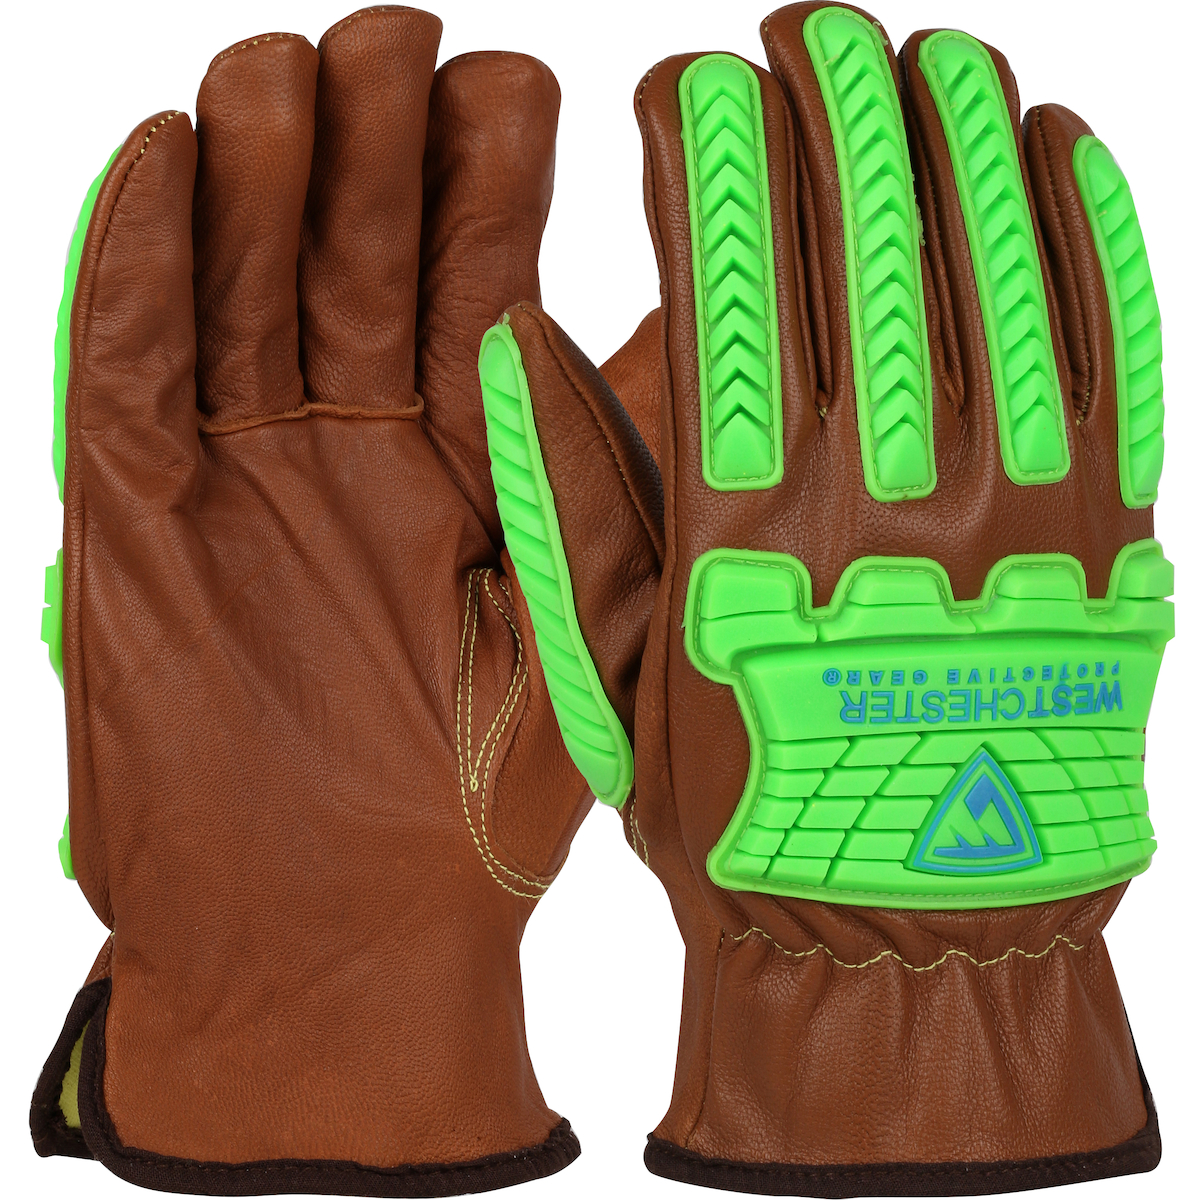 KS993KOAB PIP® West Chester® Top Grain Goatskin Impact Leather Drivers Glove with Para-Aramid Lining and Keystone Thumb feature Oil Armor™